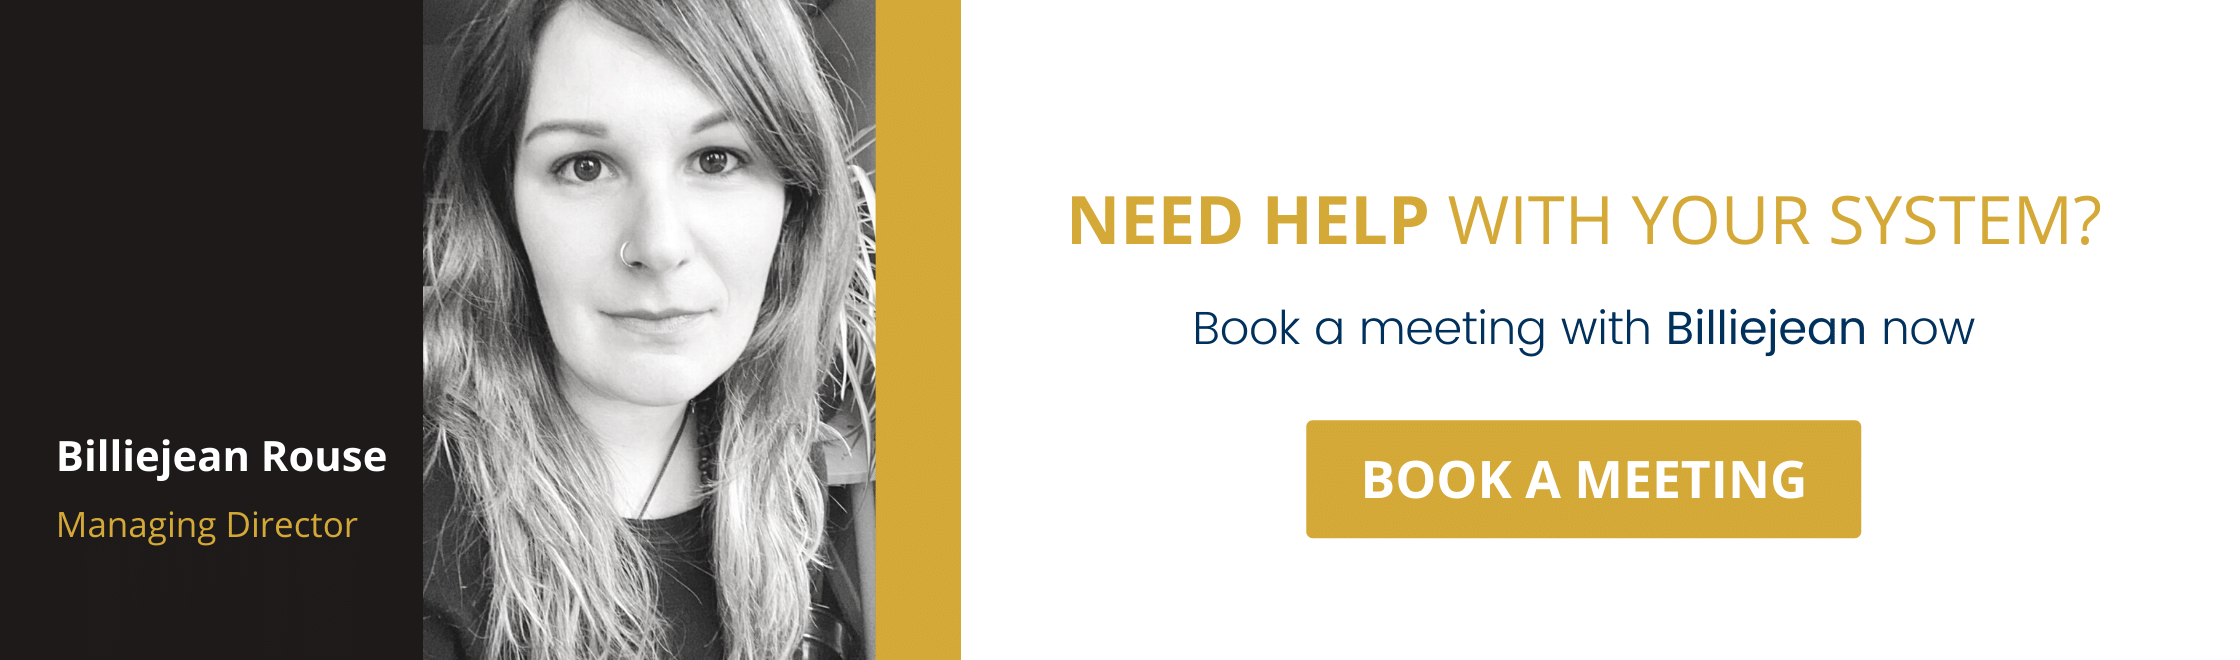 Book a meeting with Billiejean